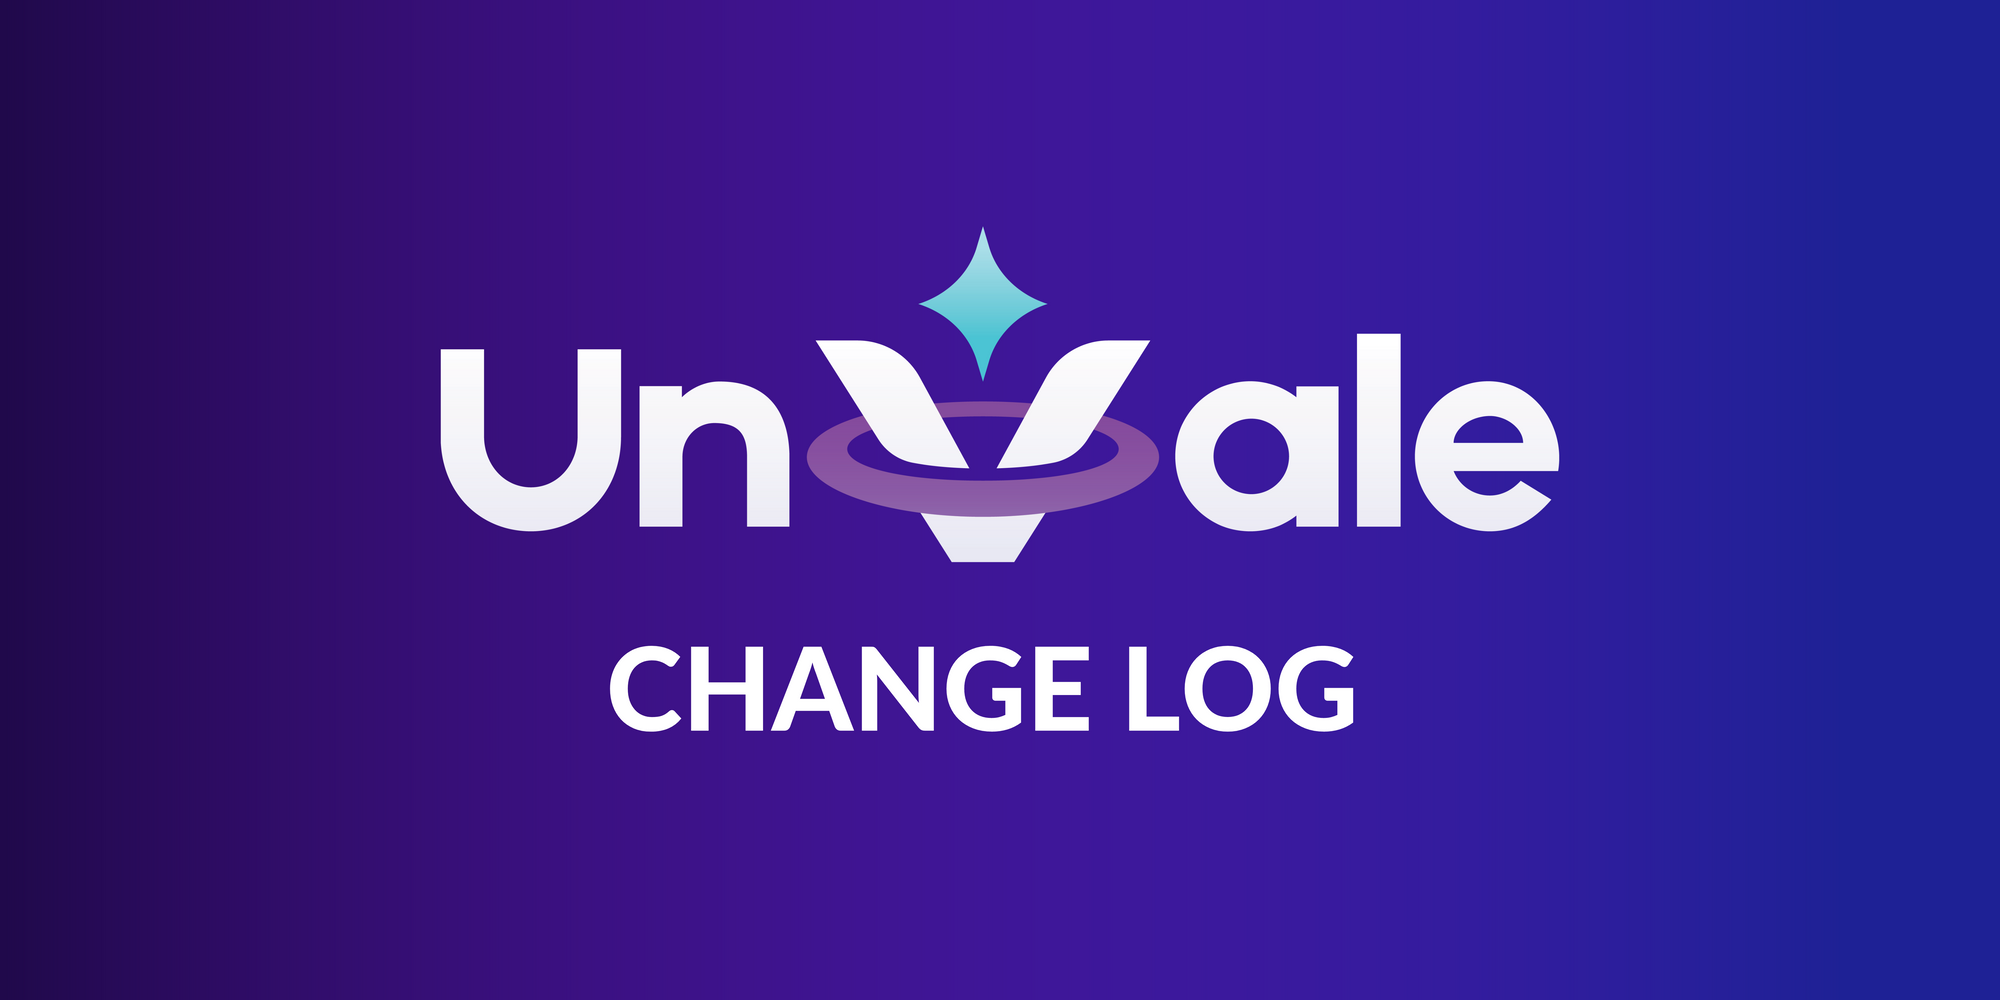 Purple to blue gradient background with the UnVale logo and the words "Change Log"